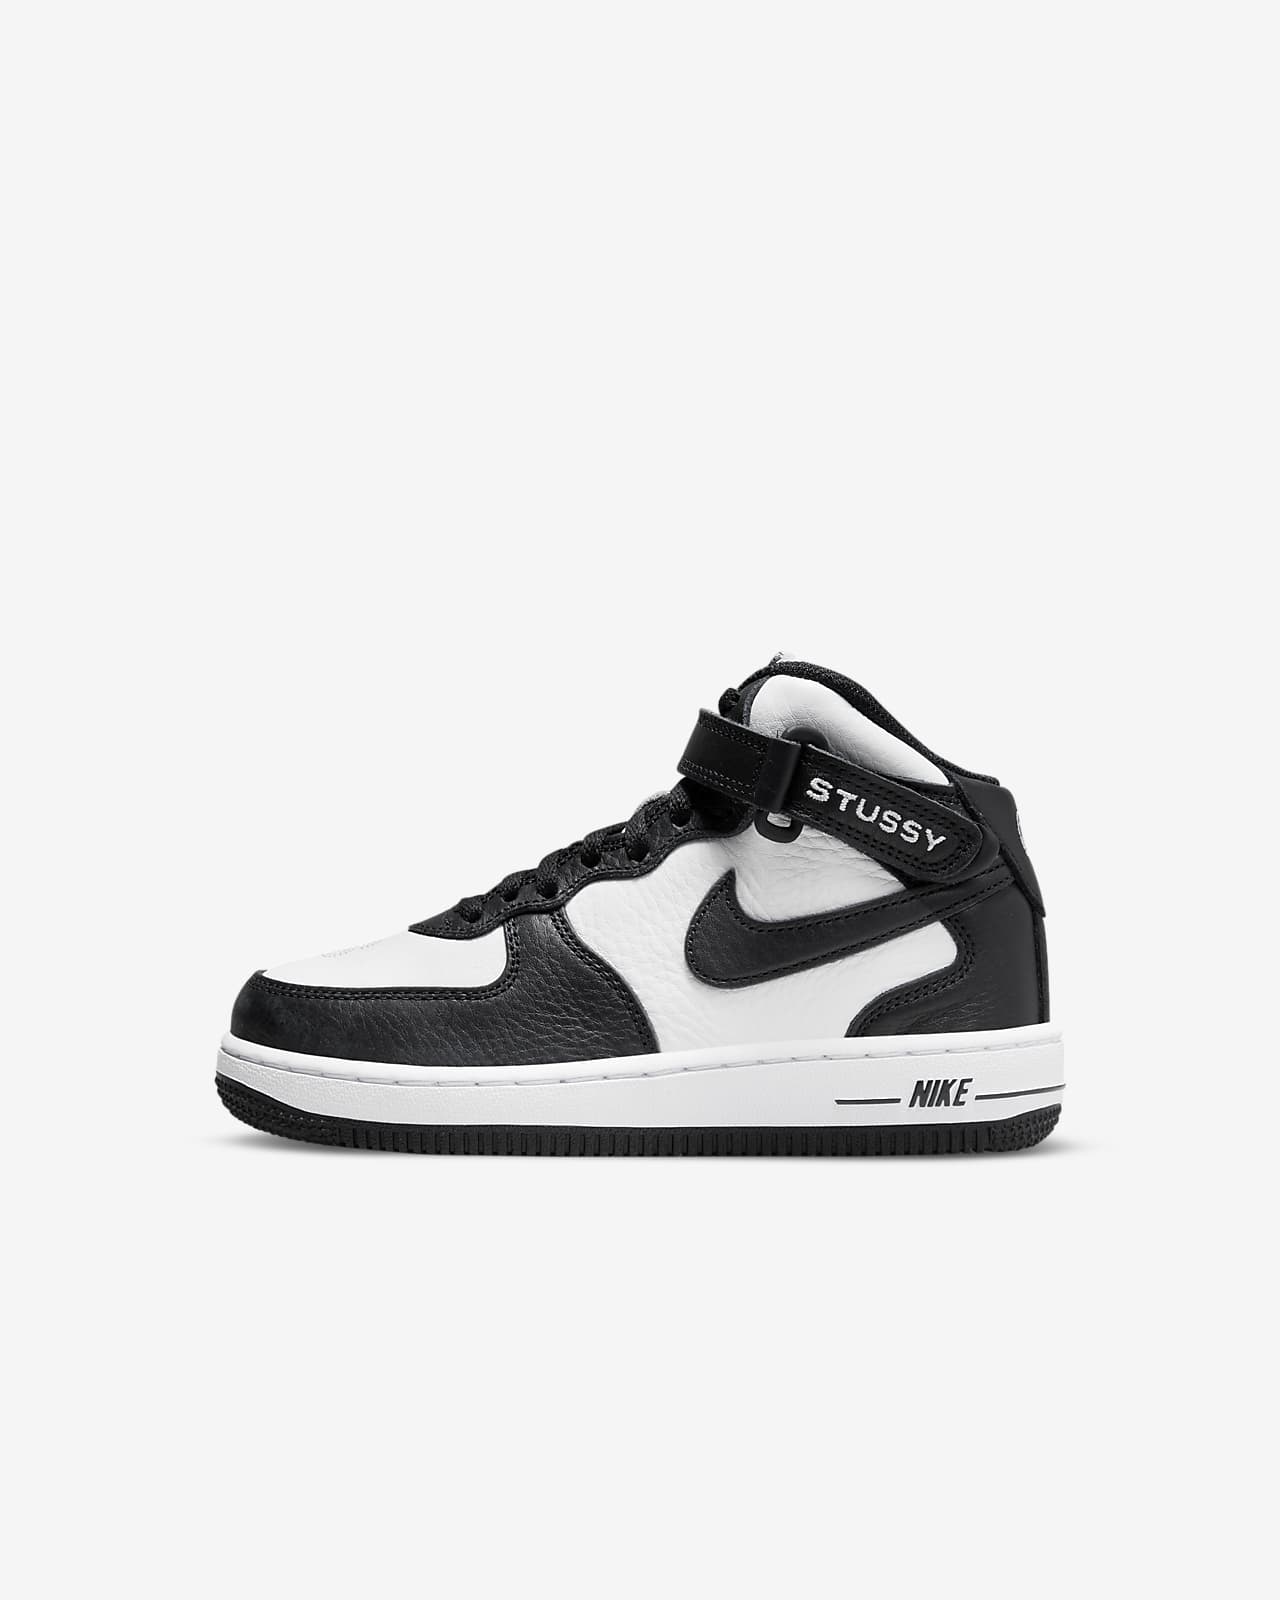 Nike Force 1 Mid SP (PS) 幼童运动童鞋